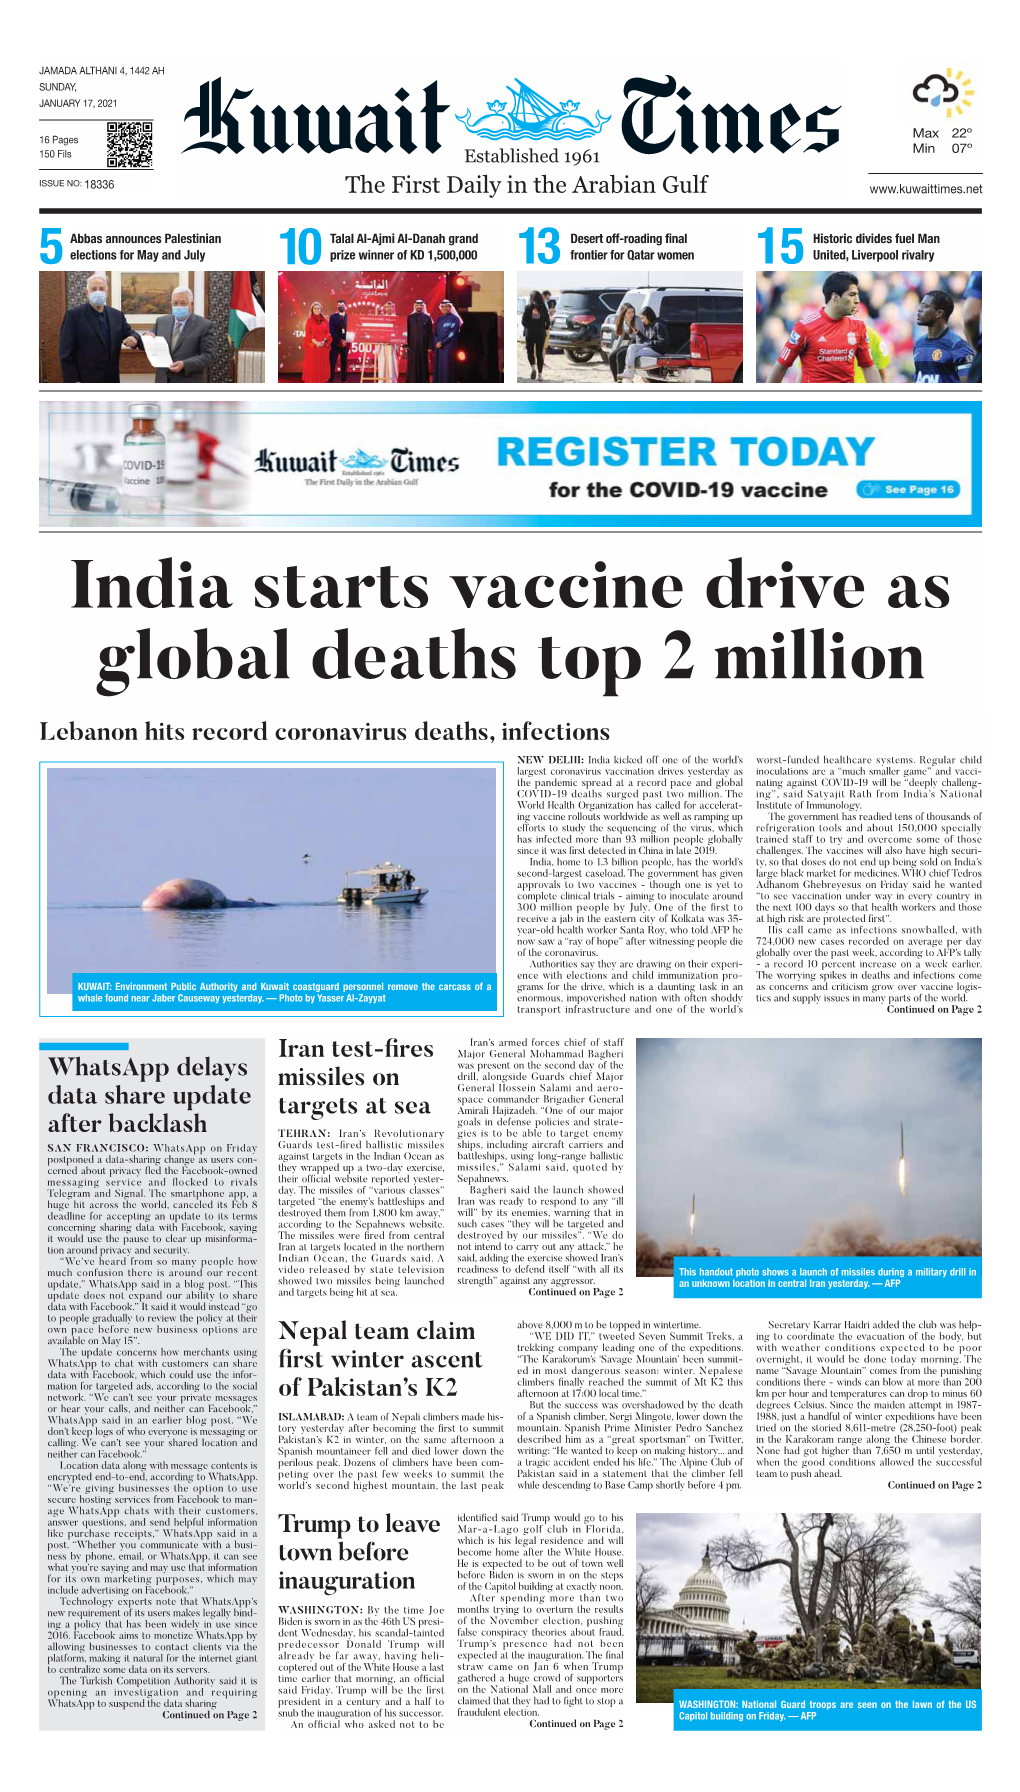 India Starts Vaccine Drive As Global Deaths Top 2 Million